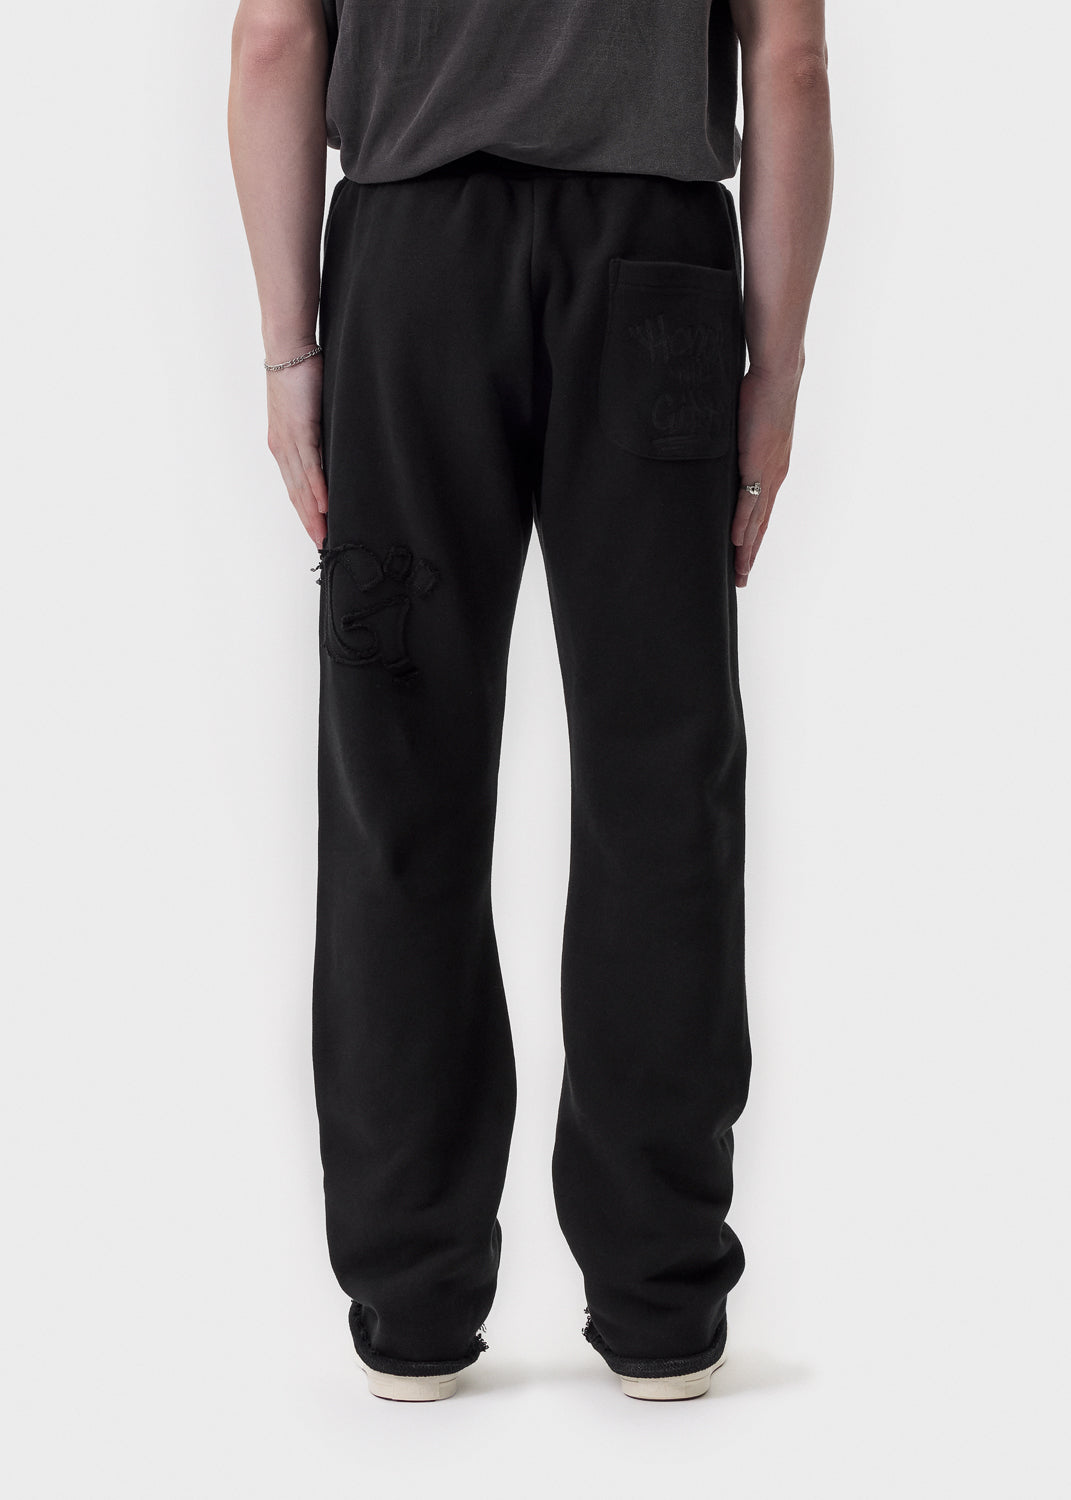 Honor the Gift - Black Script Embroidered Sweatpants | 1032 SPACE